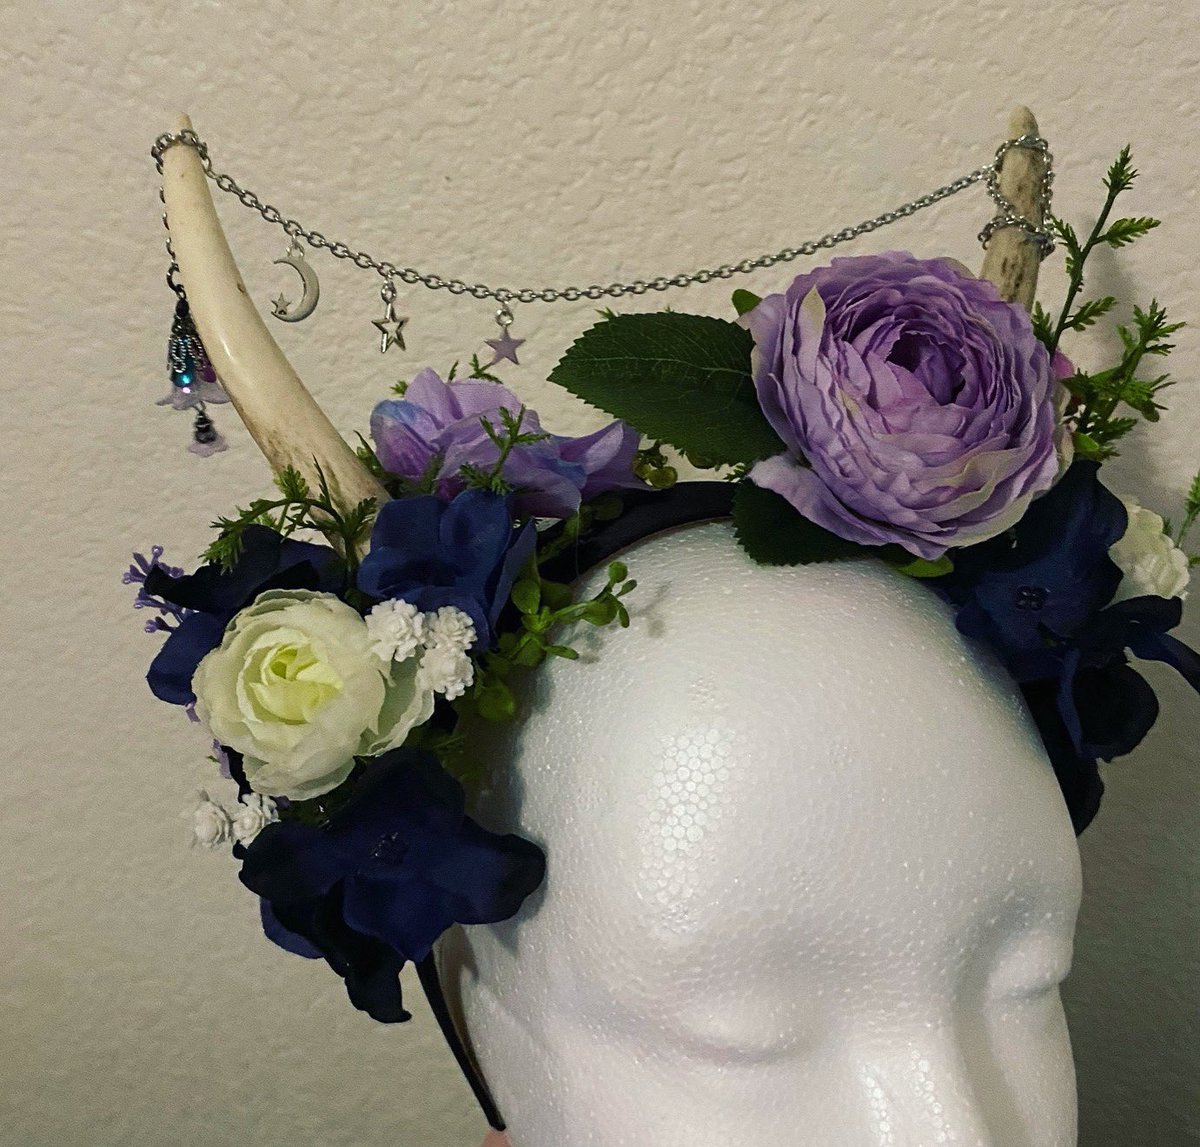 Two horned flower crown headbands I made a bit ago.  Thought they were cool. 

#flowercrown #fantasy #larp #dnd